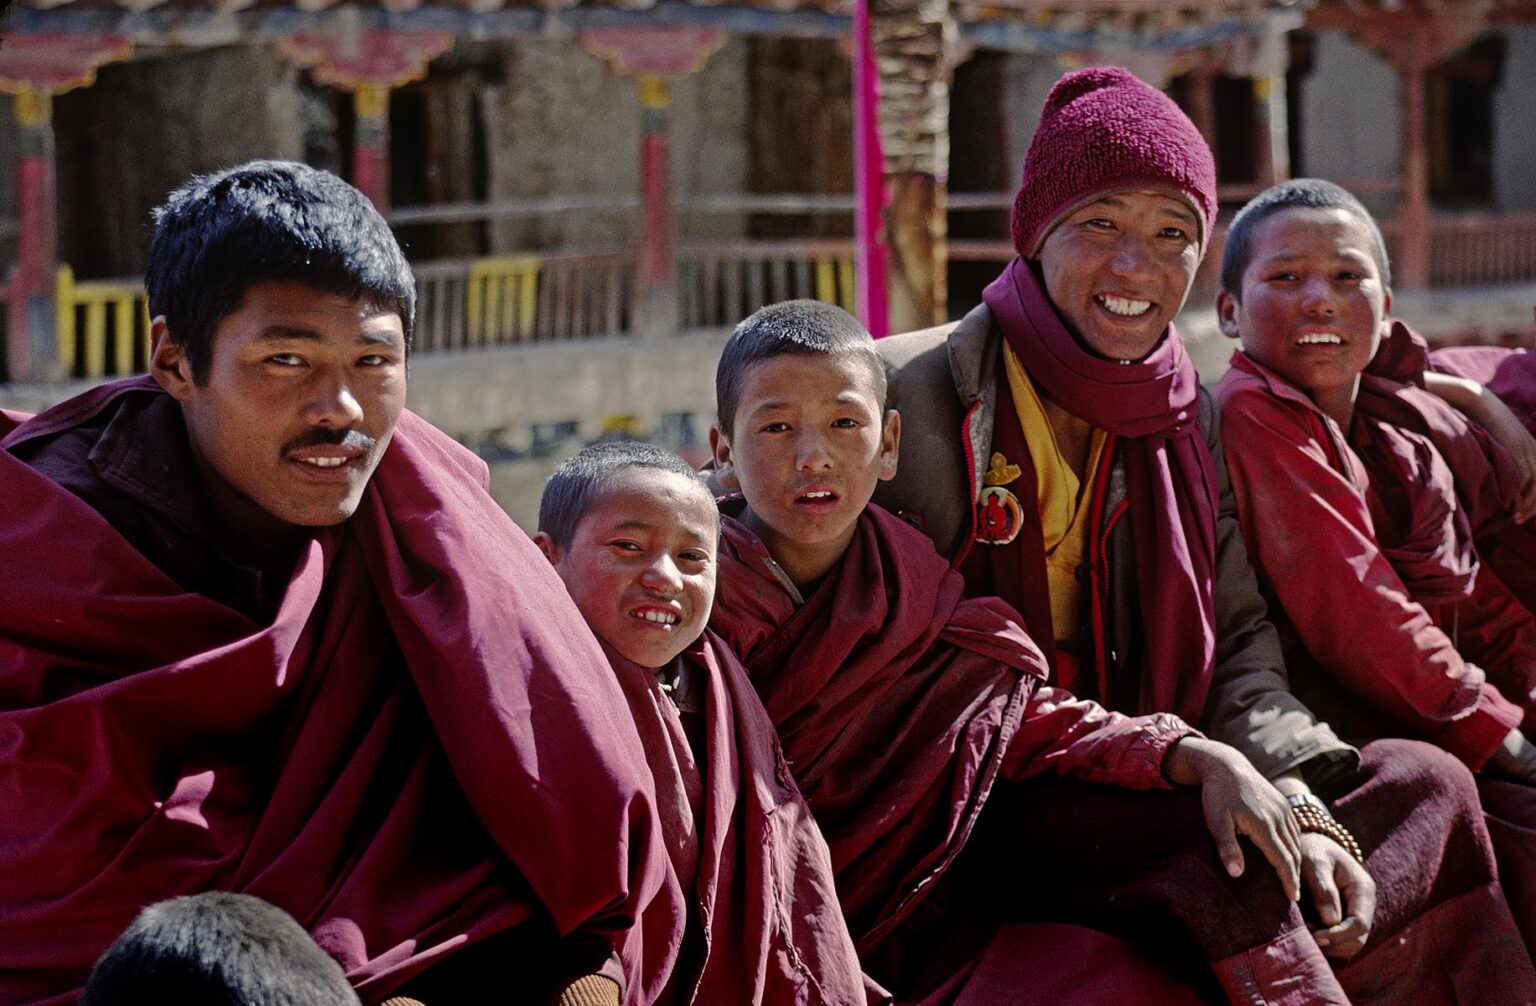 YOUNG MONKS sit in an upper courtyard of HEMIS GOMPA (monastery) - LADAKH, INDIA